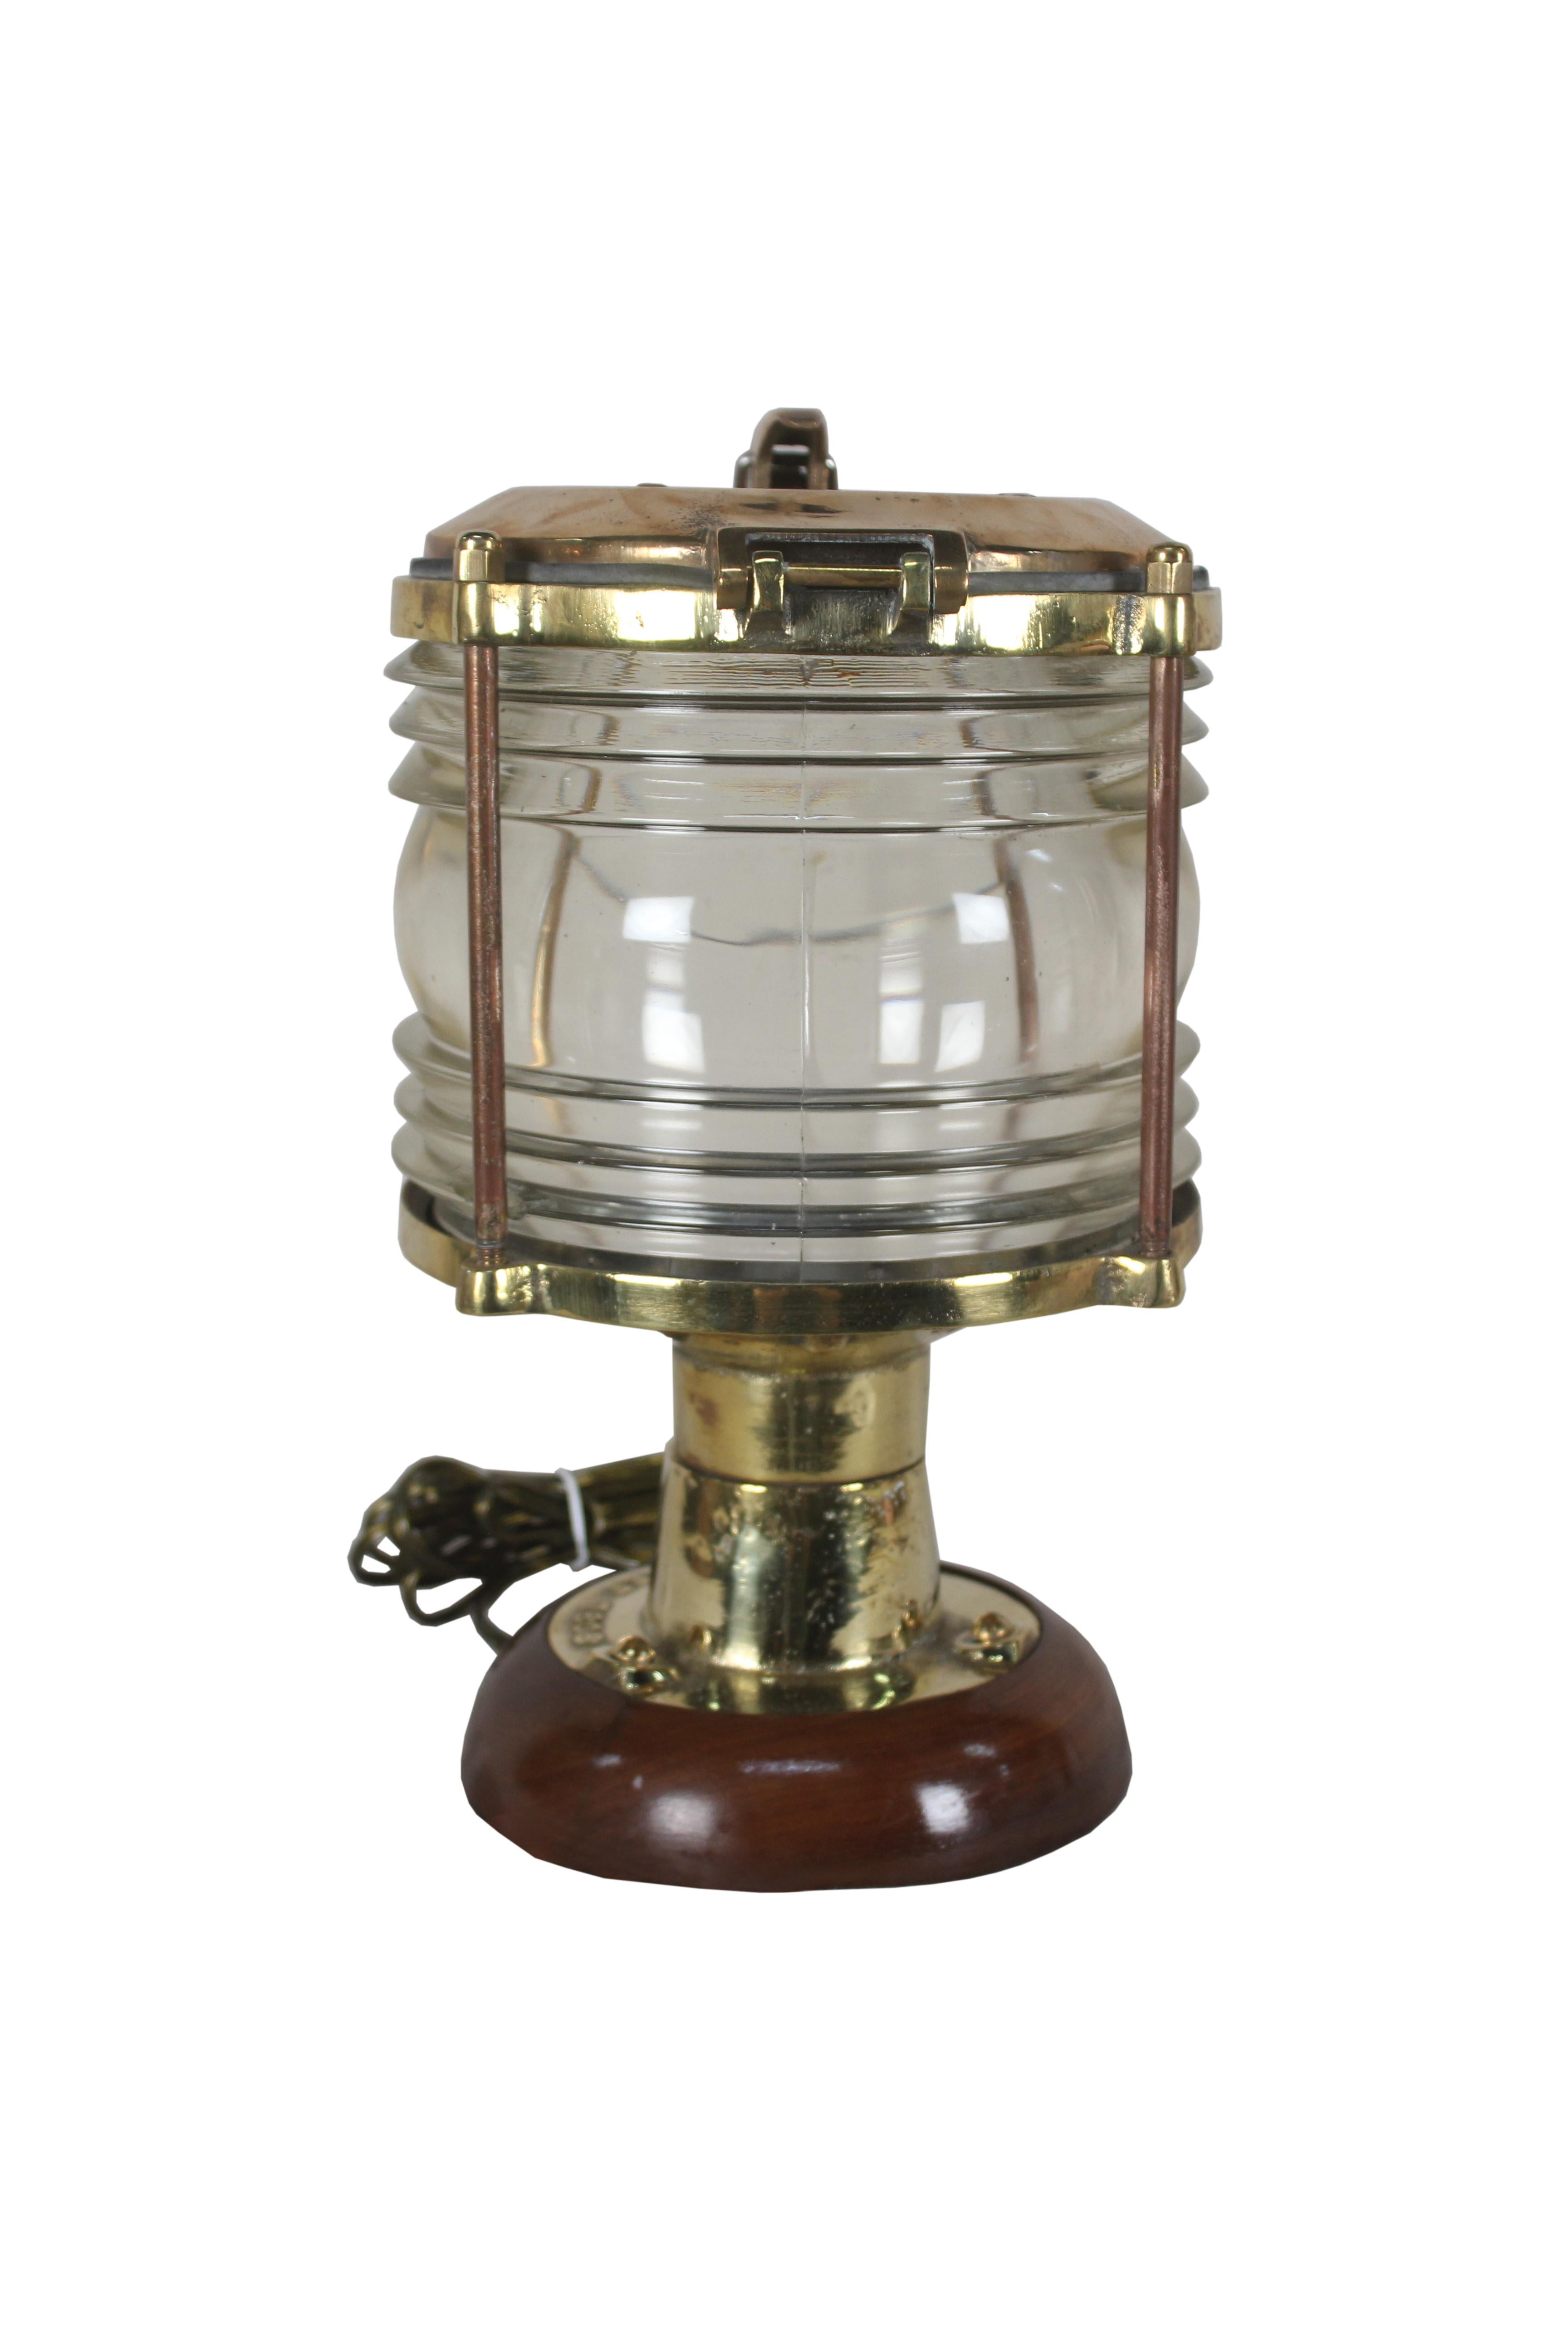 A pair of handsome brass ship's post lights with Fresnel Lens glass. These have been mounted on a teak base to use as table lamps. Rewired for American use and take a standard base light bulb. The brass top has a latch that lifts for access, 1970s,